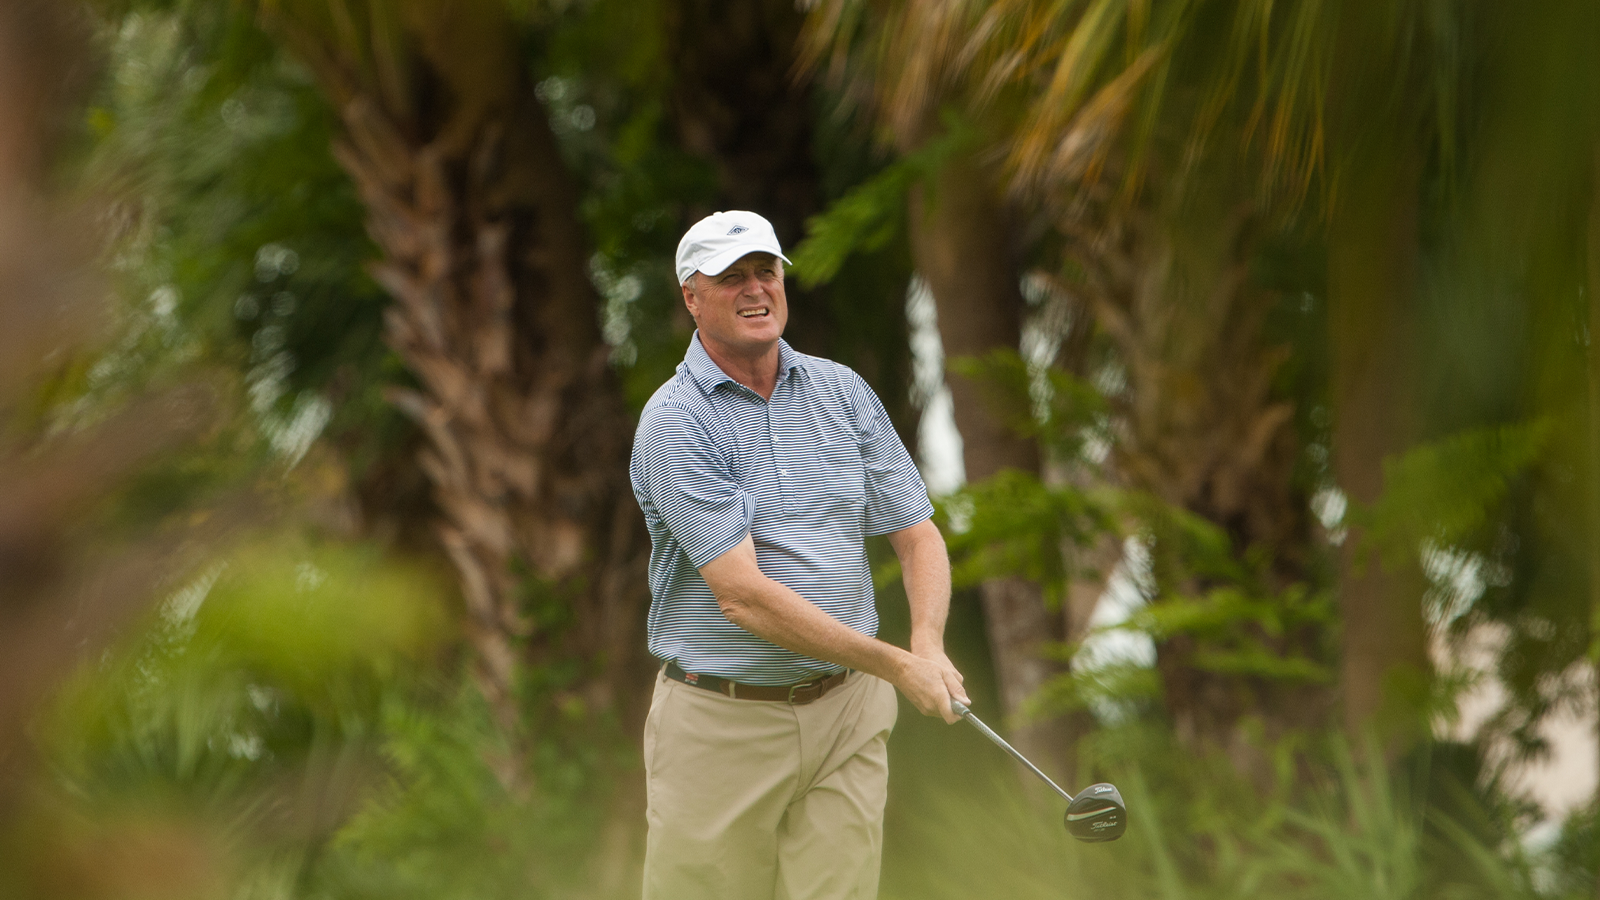 Bruce Zabriski watches his shot at PGA Golf Club on April 16, 2014 in Port St. Lucie, Florida. (Photo by Montana Pritchard/The PGA of America)